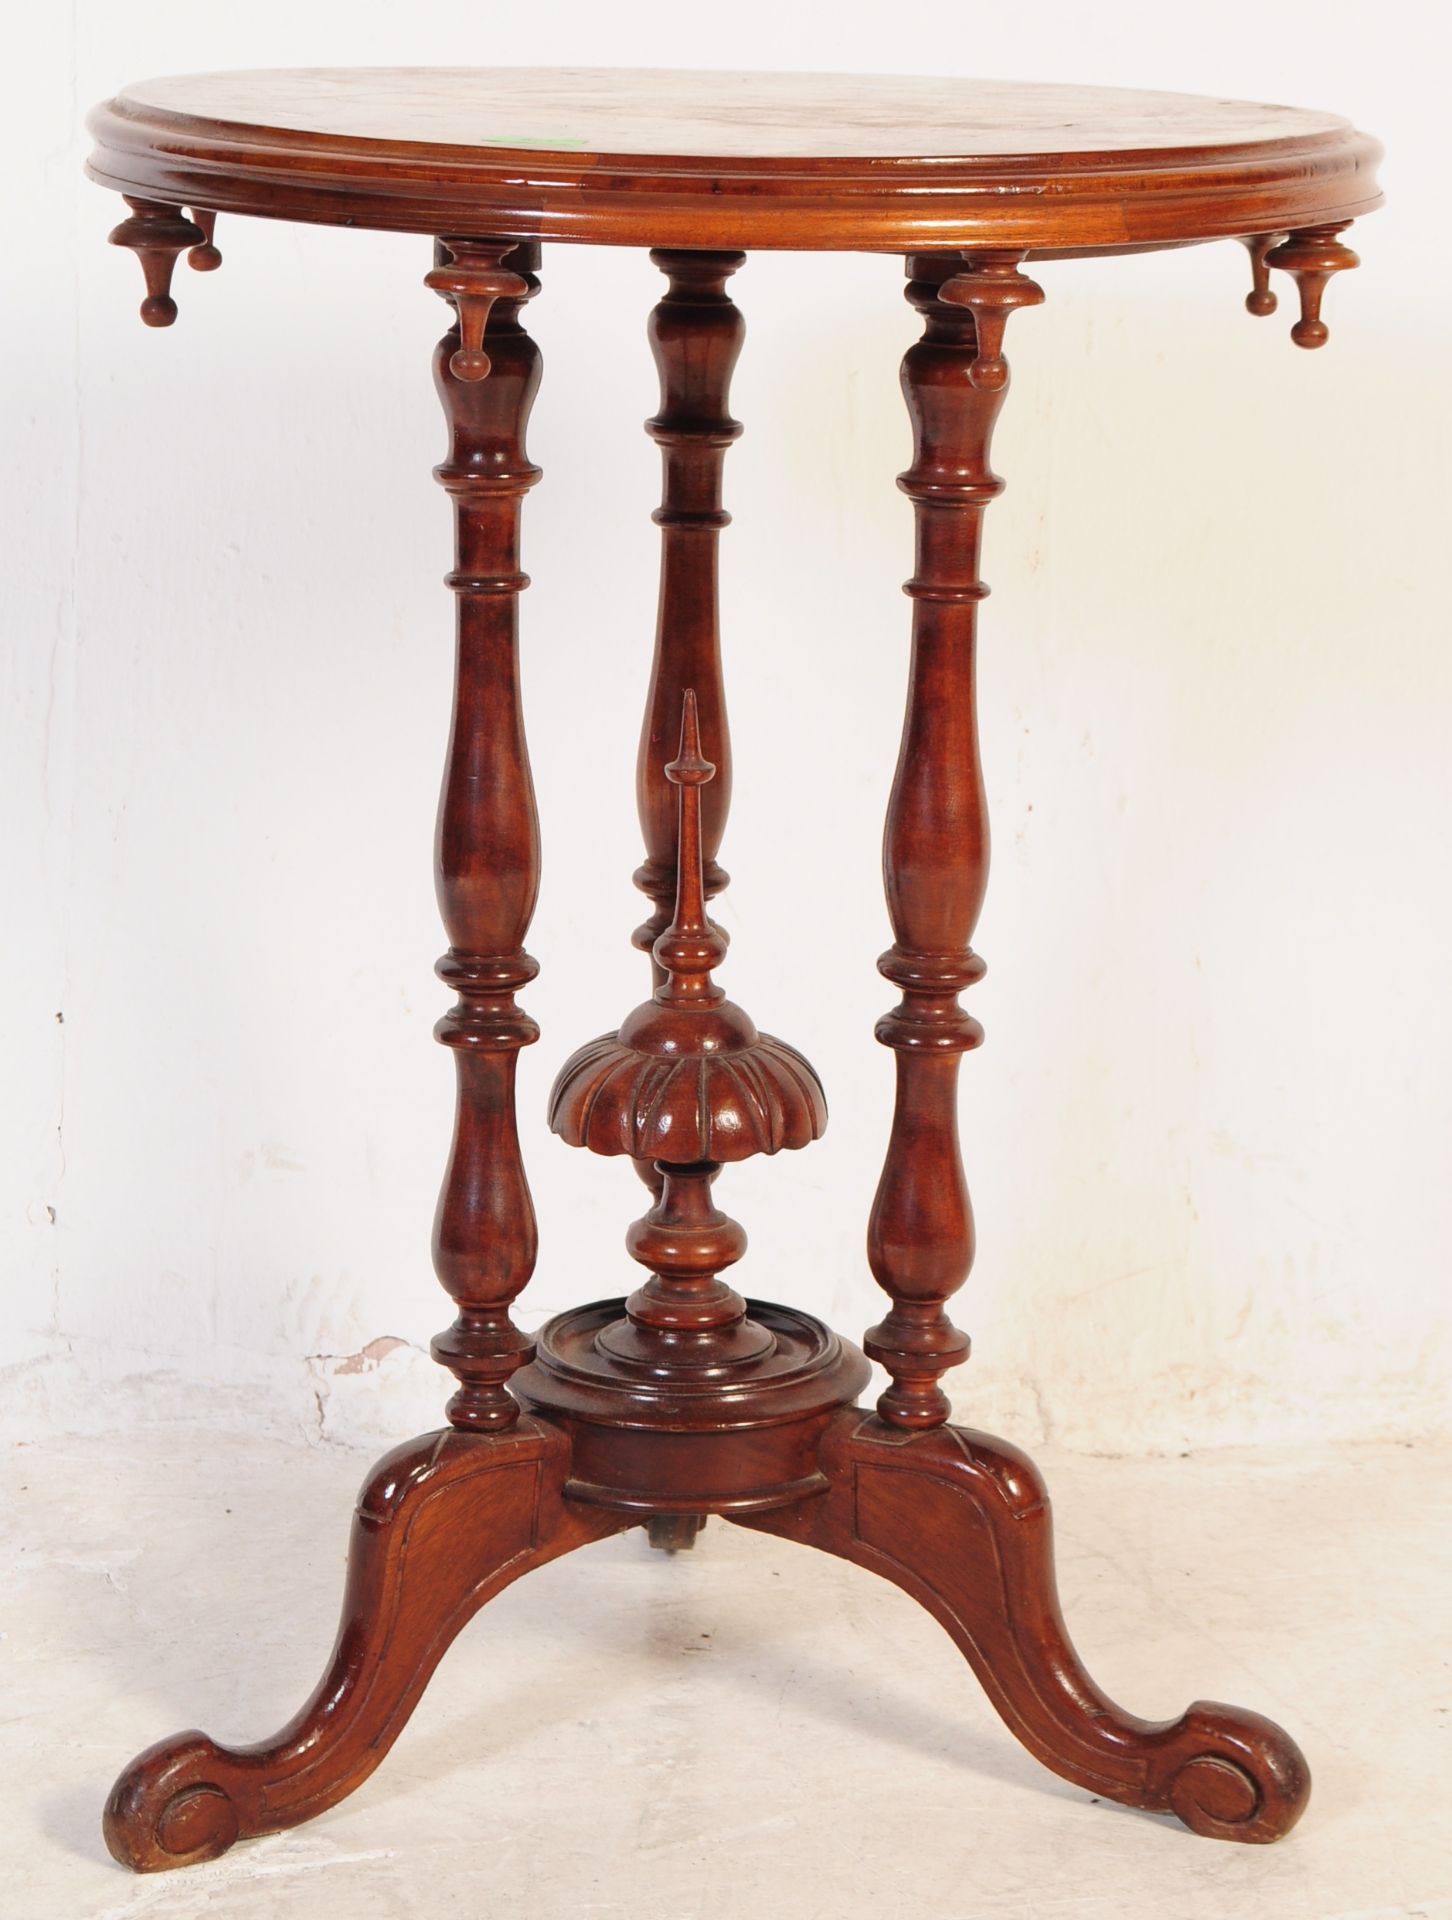 19TH CENTURY VICTORIAN WALNUT INLAID CHESS TABLE - Image 2 of 5